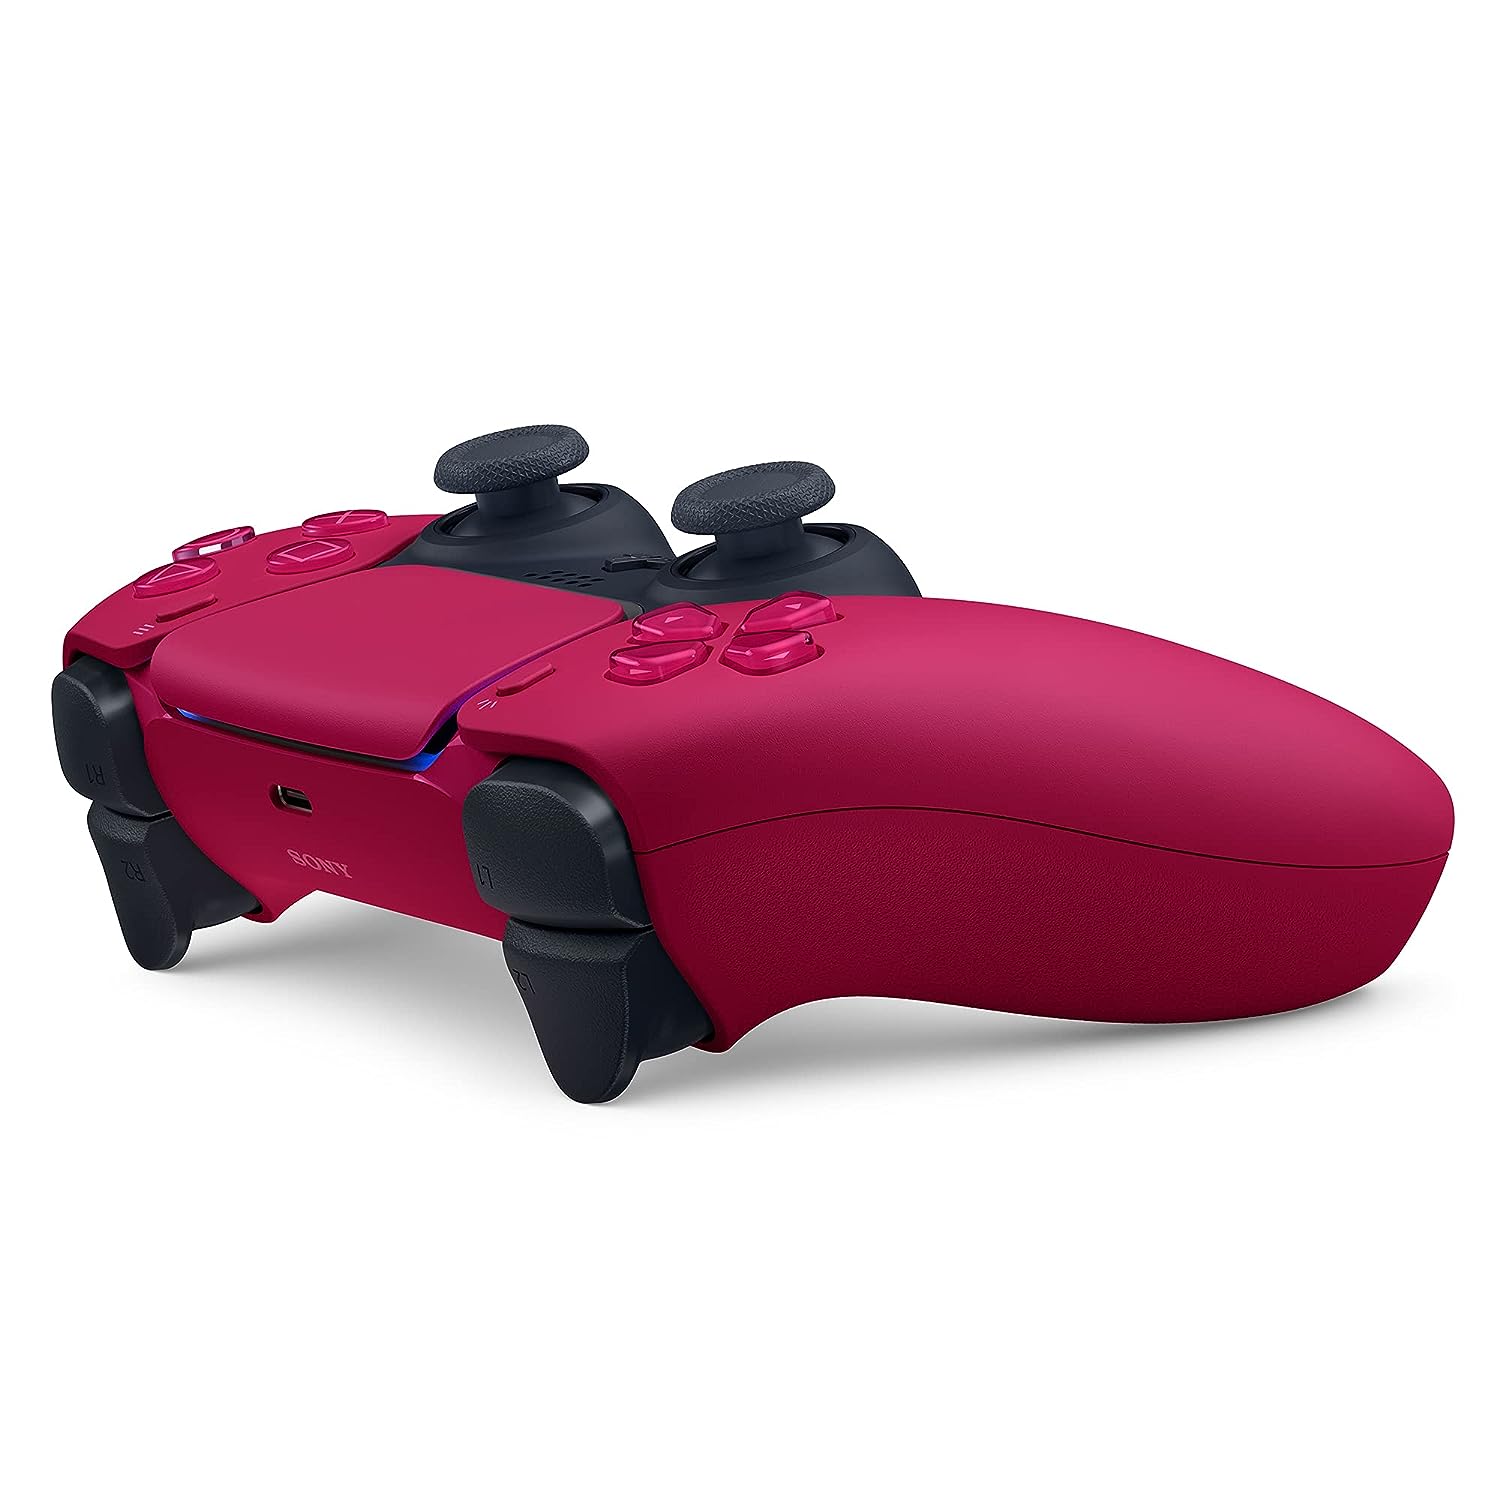 Sony PlayStation 5 DualSense Wireless Controller - Cosmic Red (Refurbished)